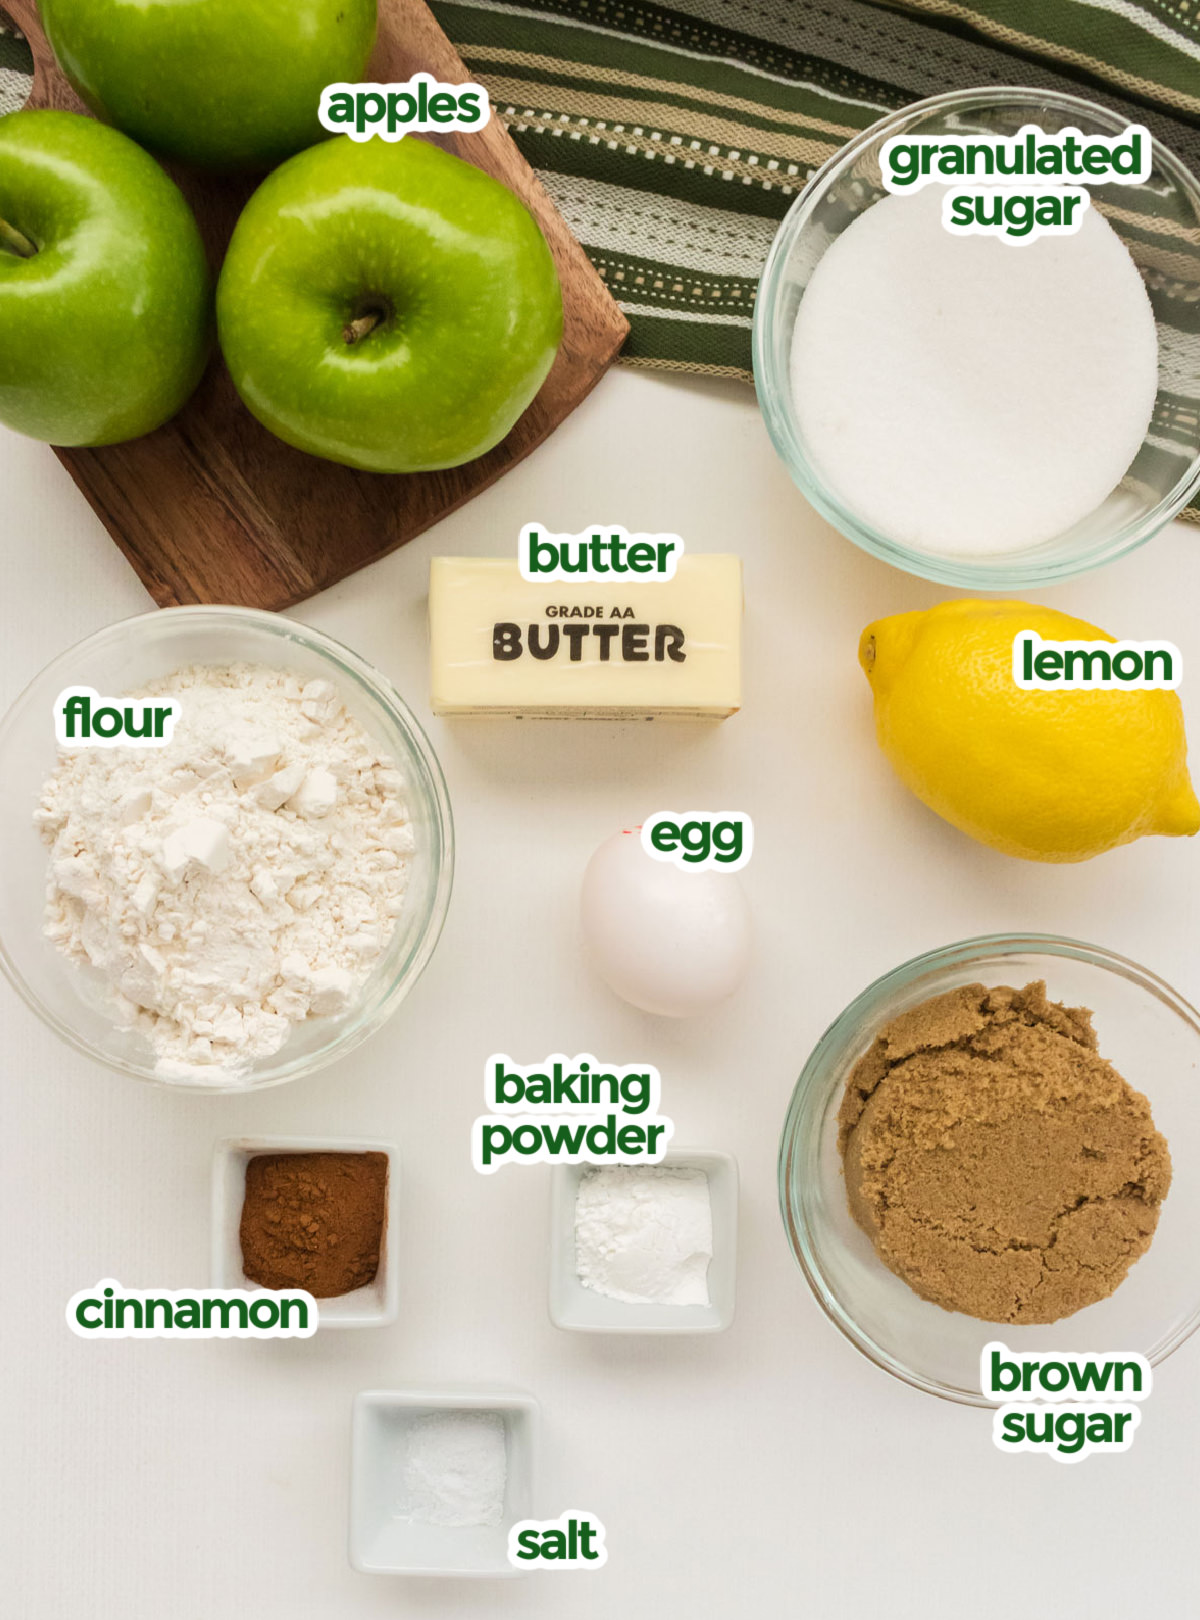 All the ingredients you will need to make Easy Apple Cobbler including apples, sugar, lemon, egg, butter, flour, brown sugar, baking powder, cinnamon and salt.